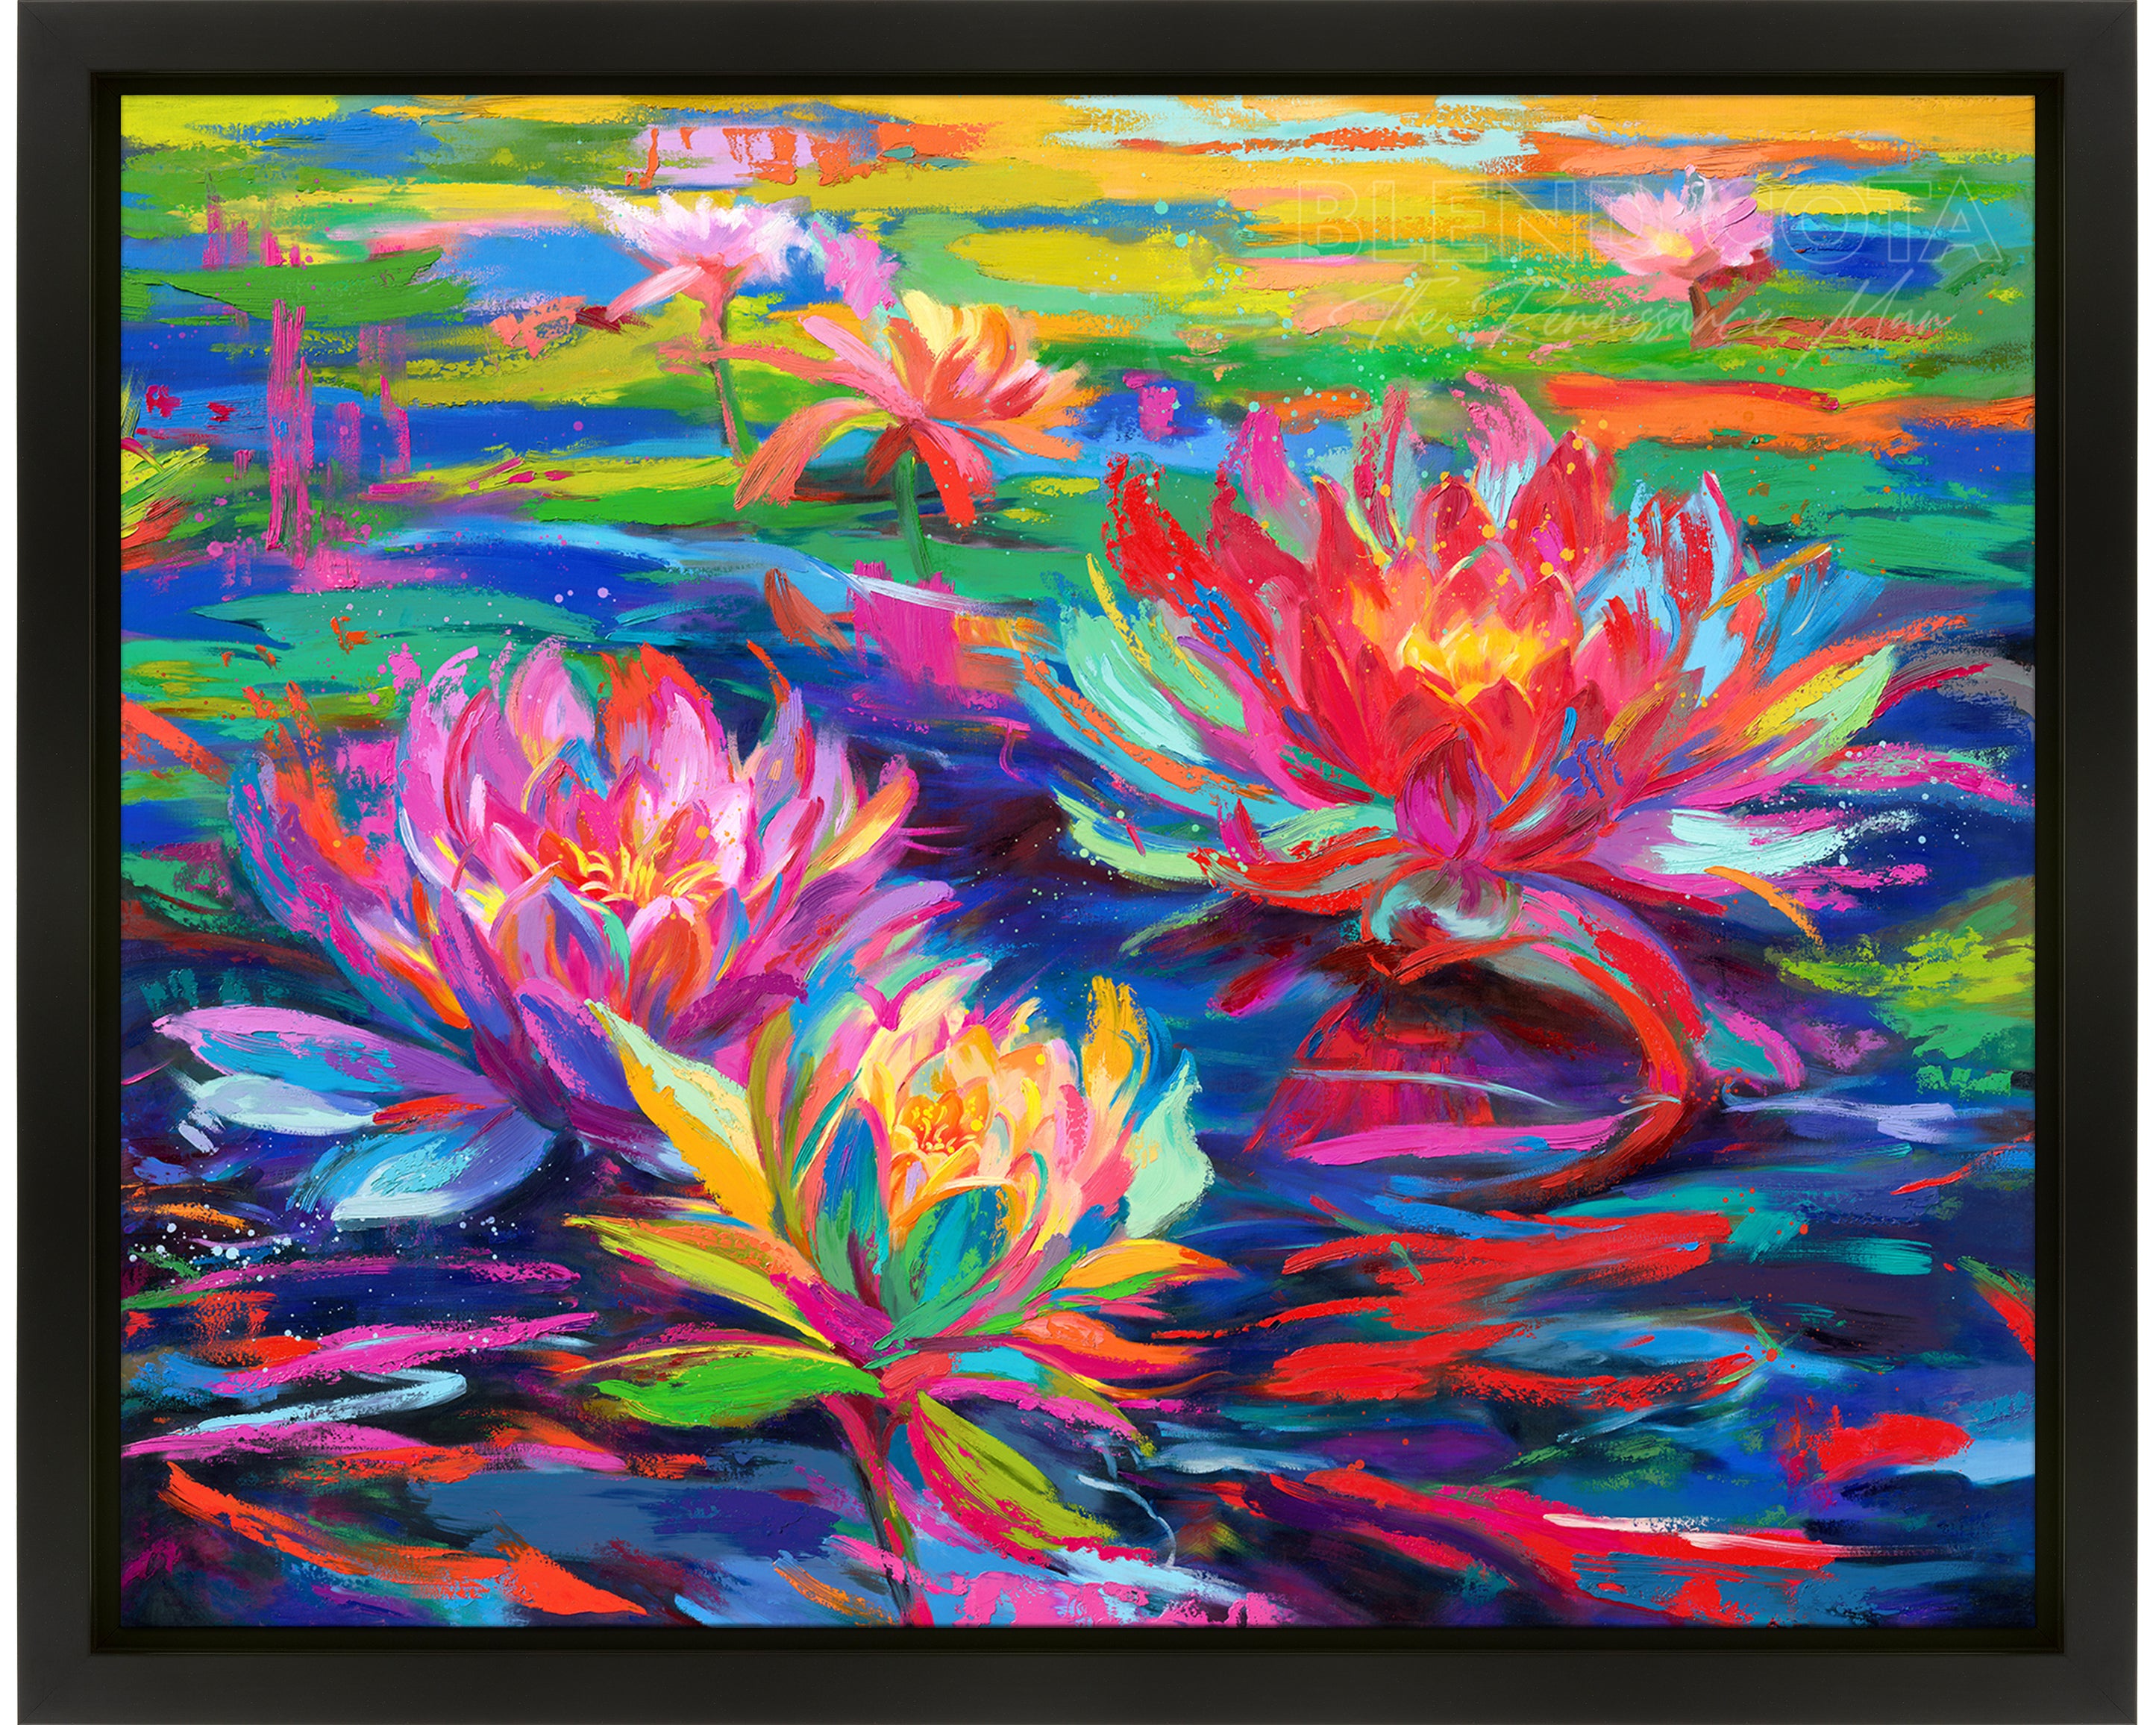  Oil on canvas original painting of red, pink and yellow water lilies blooming in a pond of lily pads, abundant and vibrant flowers in colorful brushstrokes, color expressionism style.